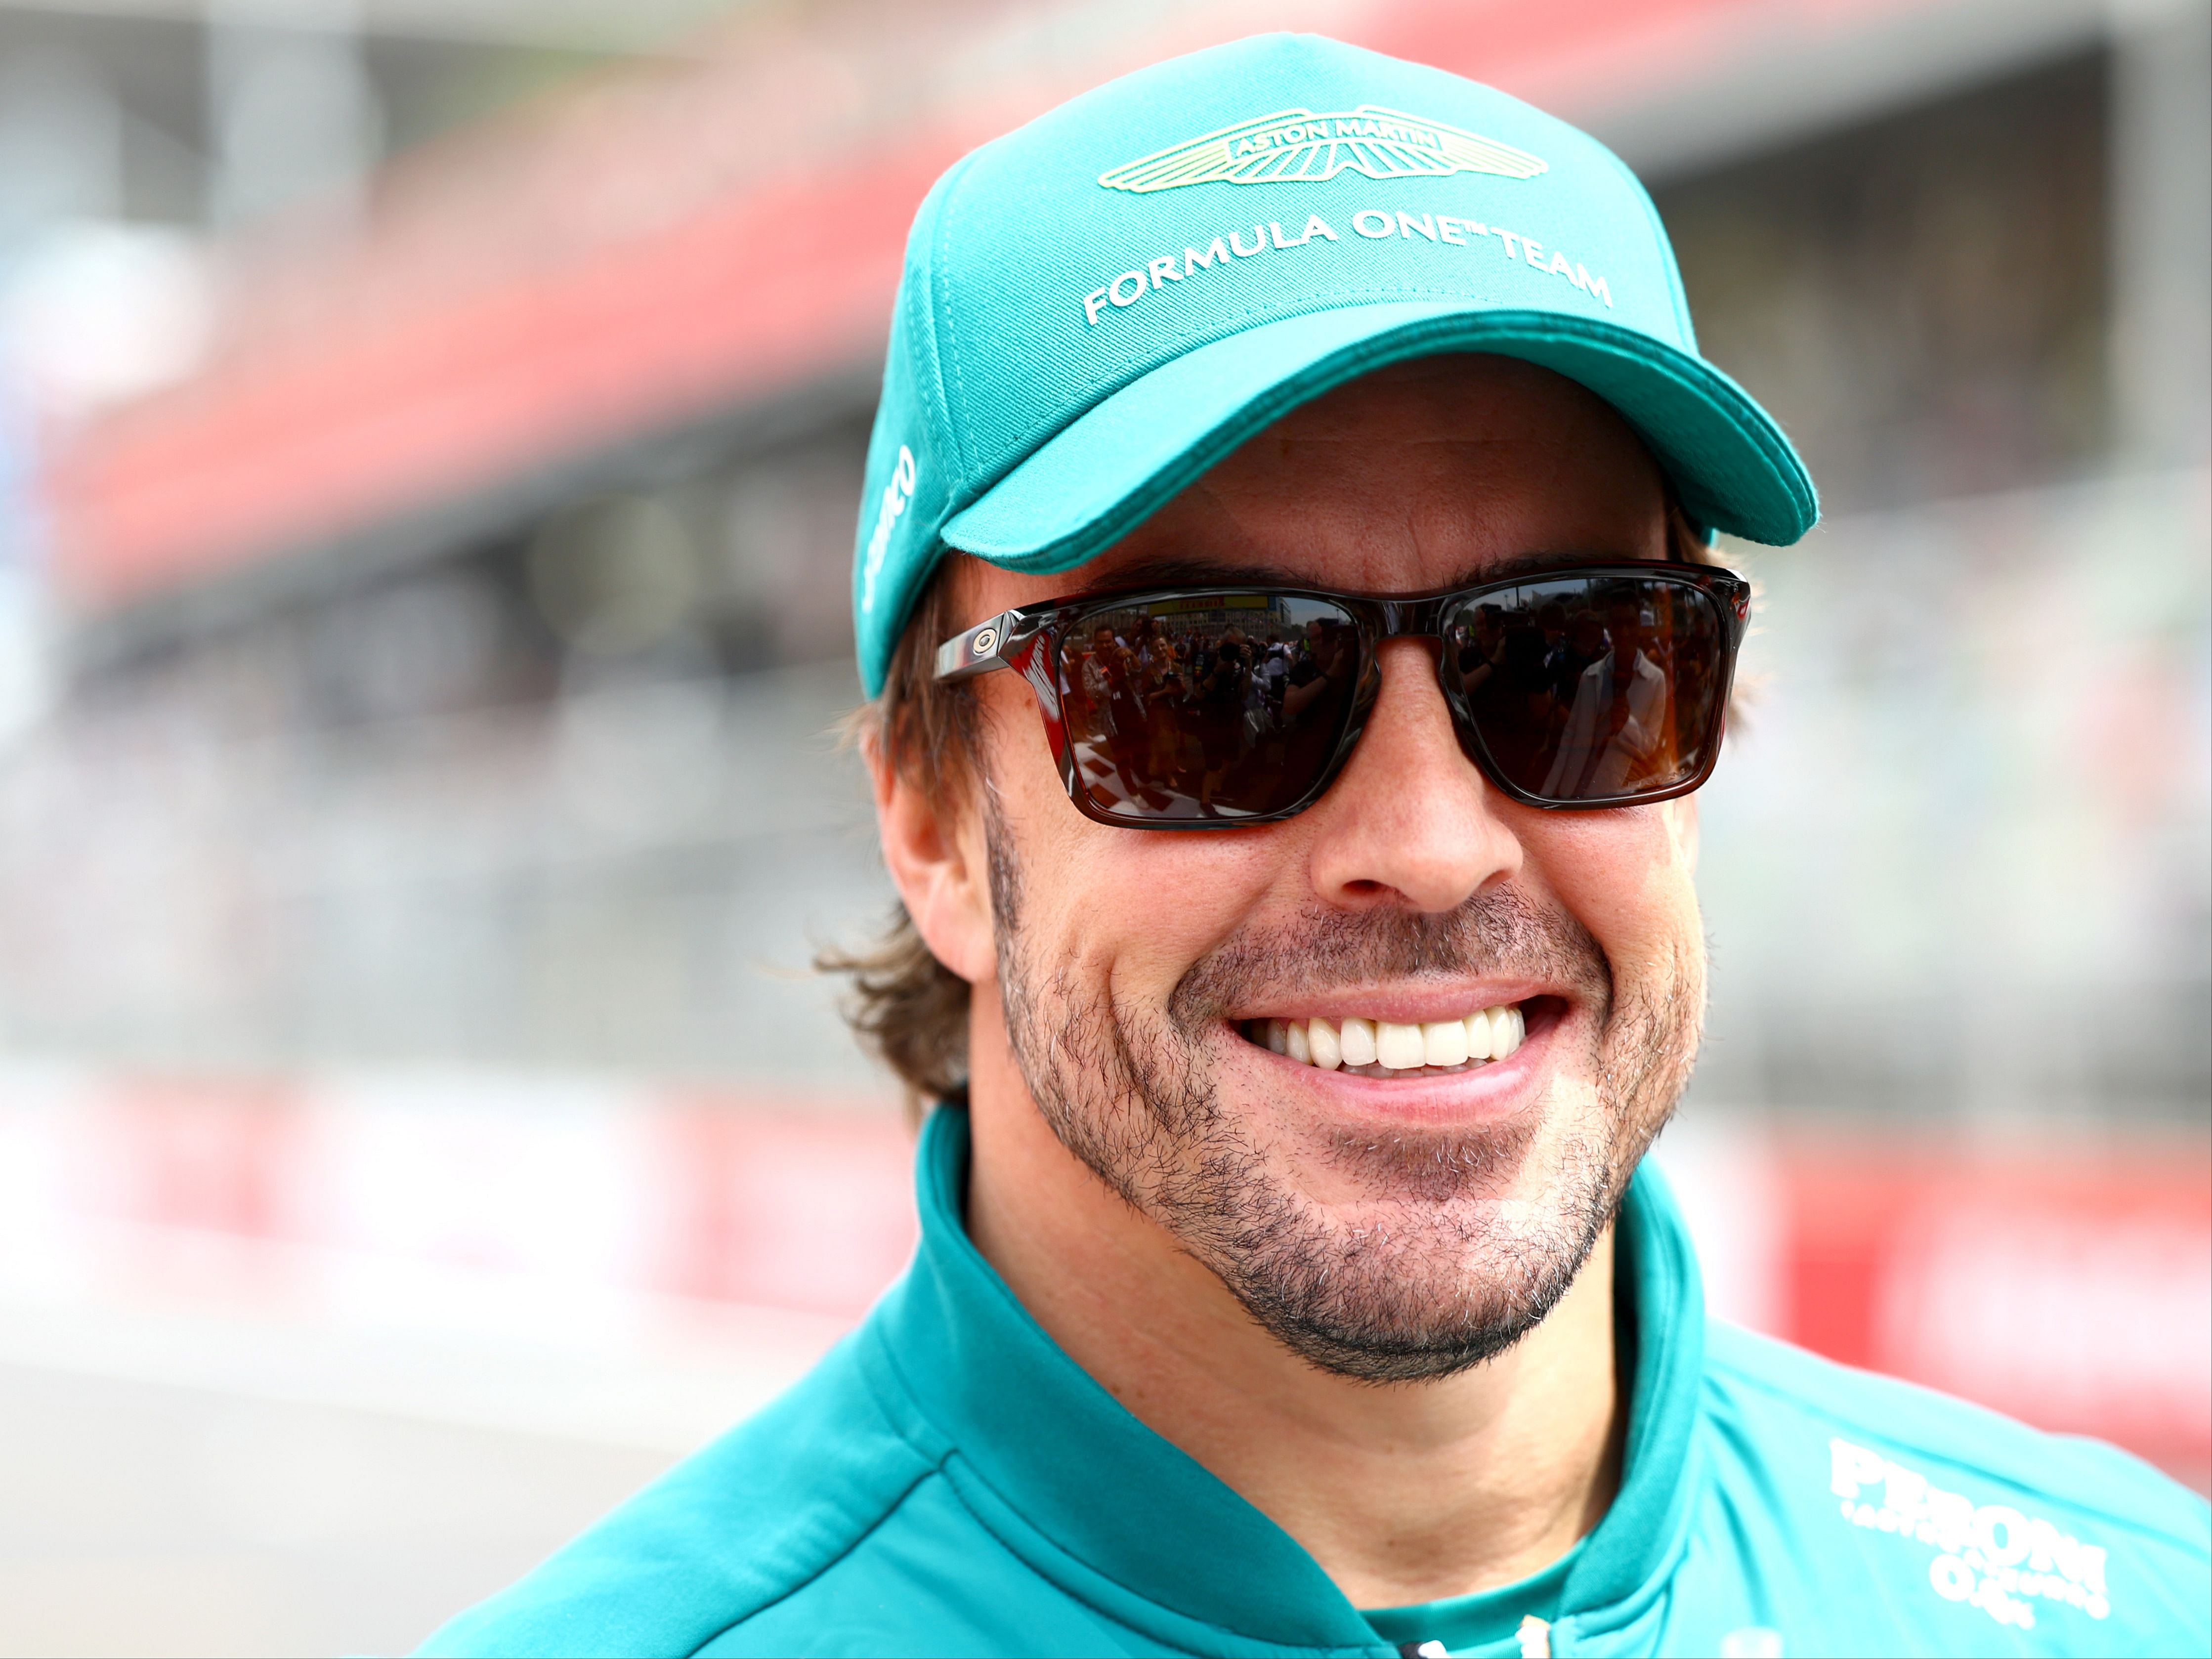 Fernando Alonso looks on in the paddock prior to the 2023 F1 Azerbaijan Grand Prix. (Photo by Mark Thompson/Getty Images)